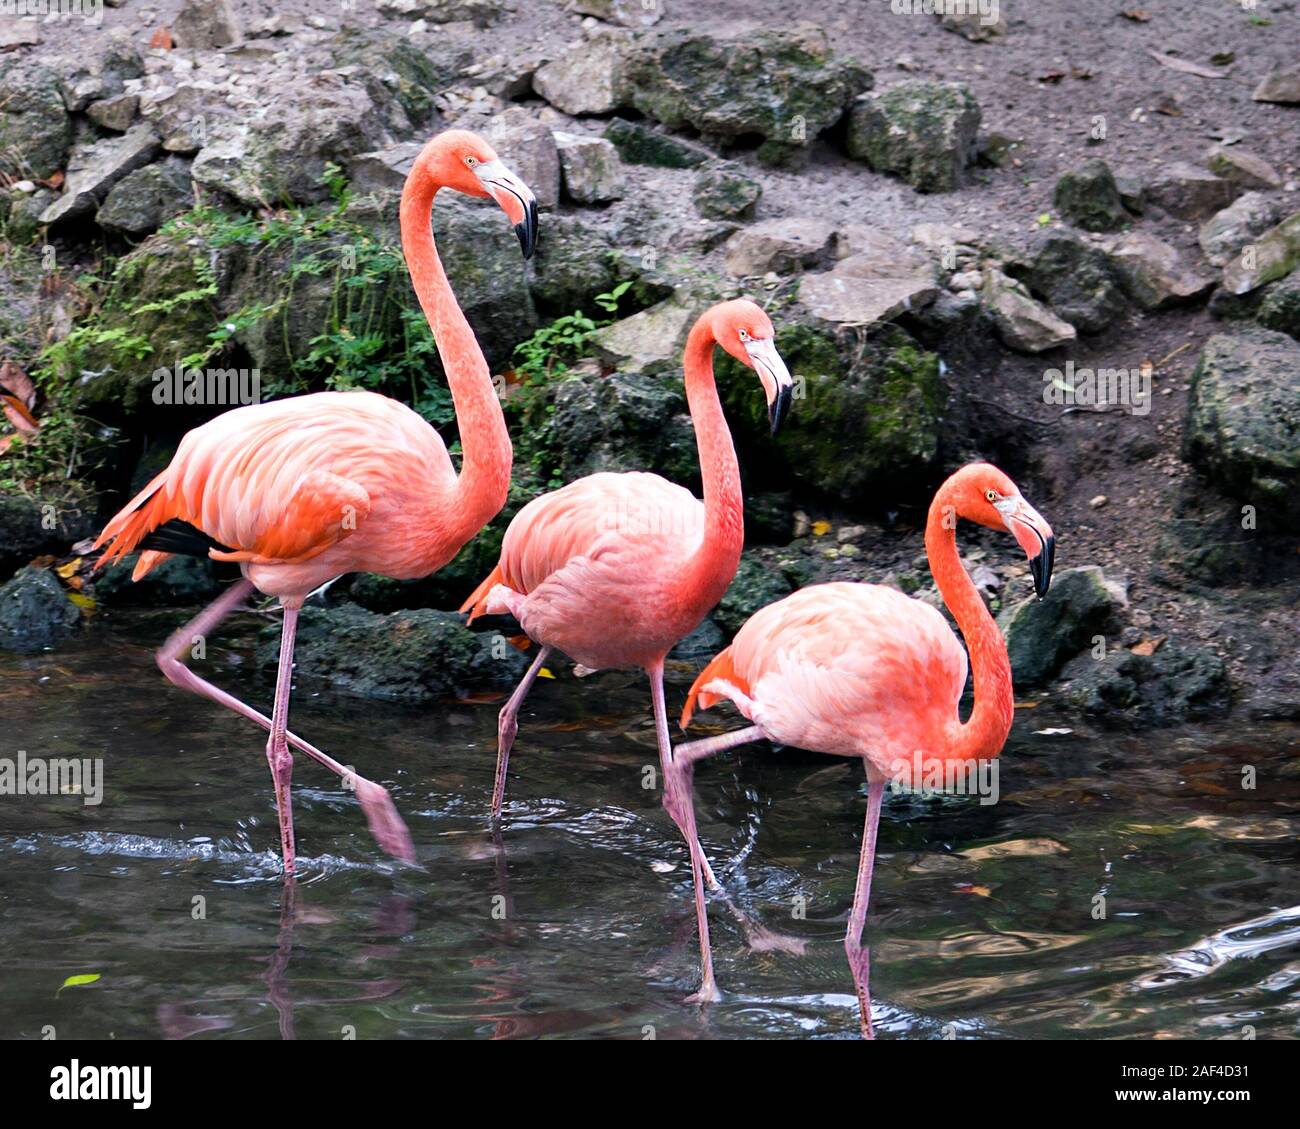 Flamingo birds trio close-up profile view in the water marching and displaying their wings, beautiful plumage, pink plumage, heads, long necks. Stock Photo